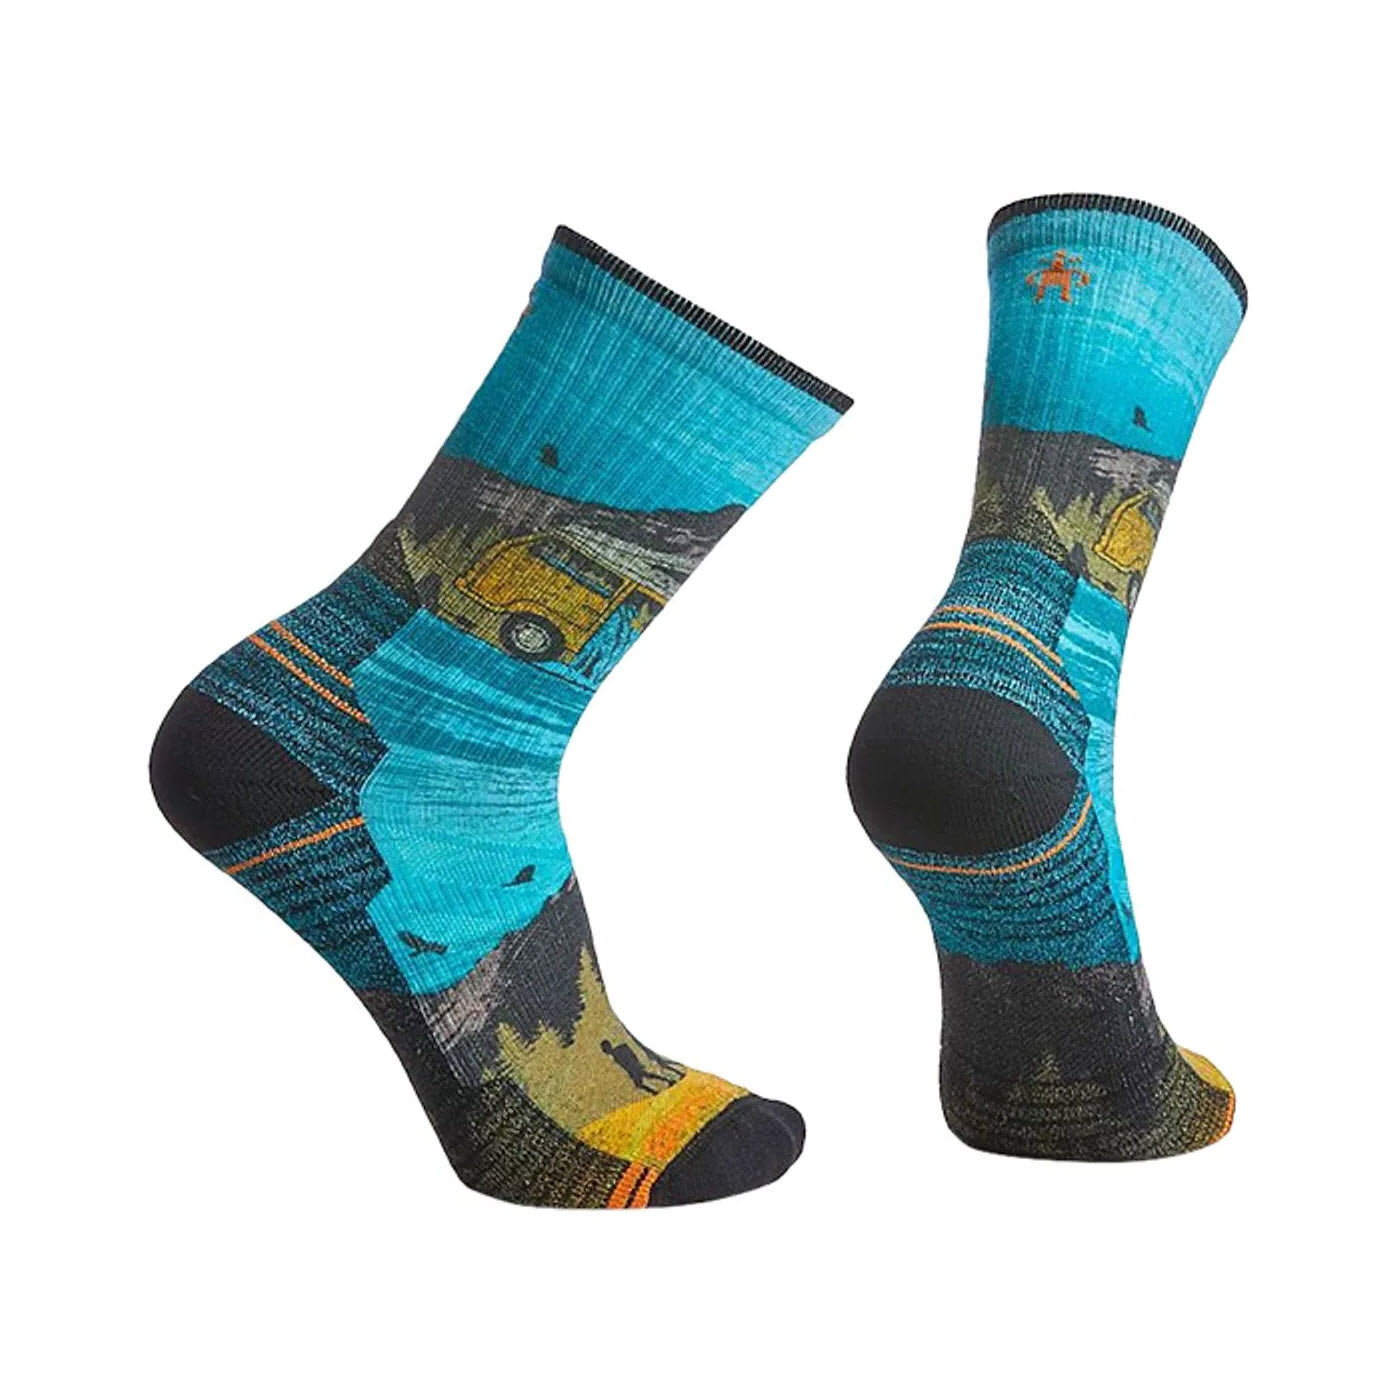 A pair of Smartwool Hike Crew Socks Great Excursion Print - Men with a landscape design featuring mountains and a camper van, displayed against a white background, offering light cushioning.